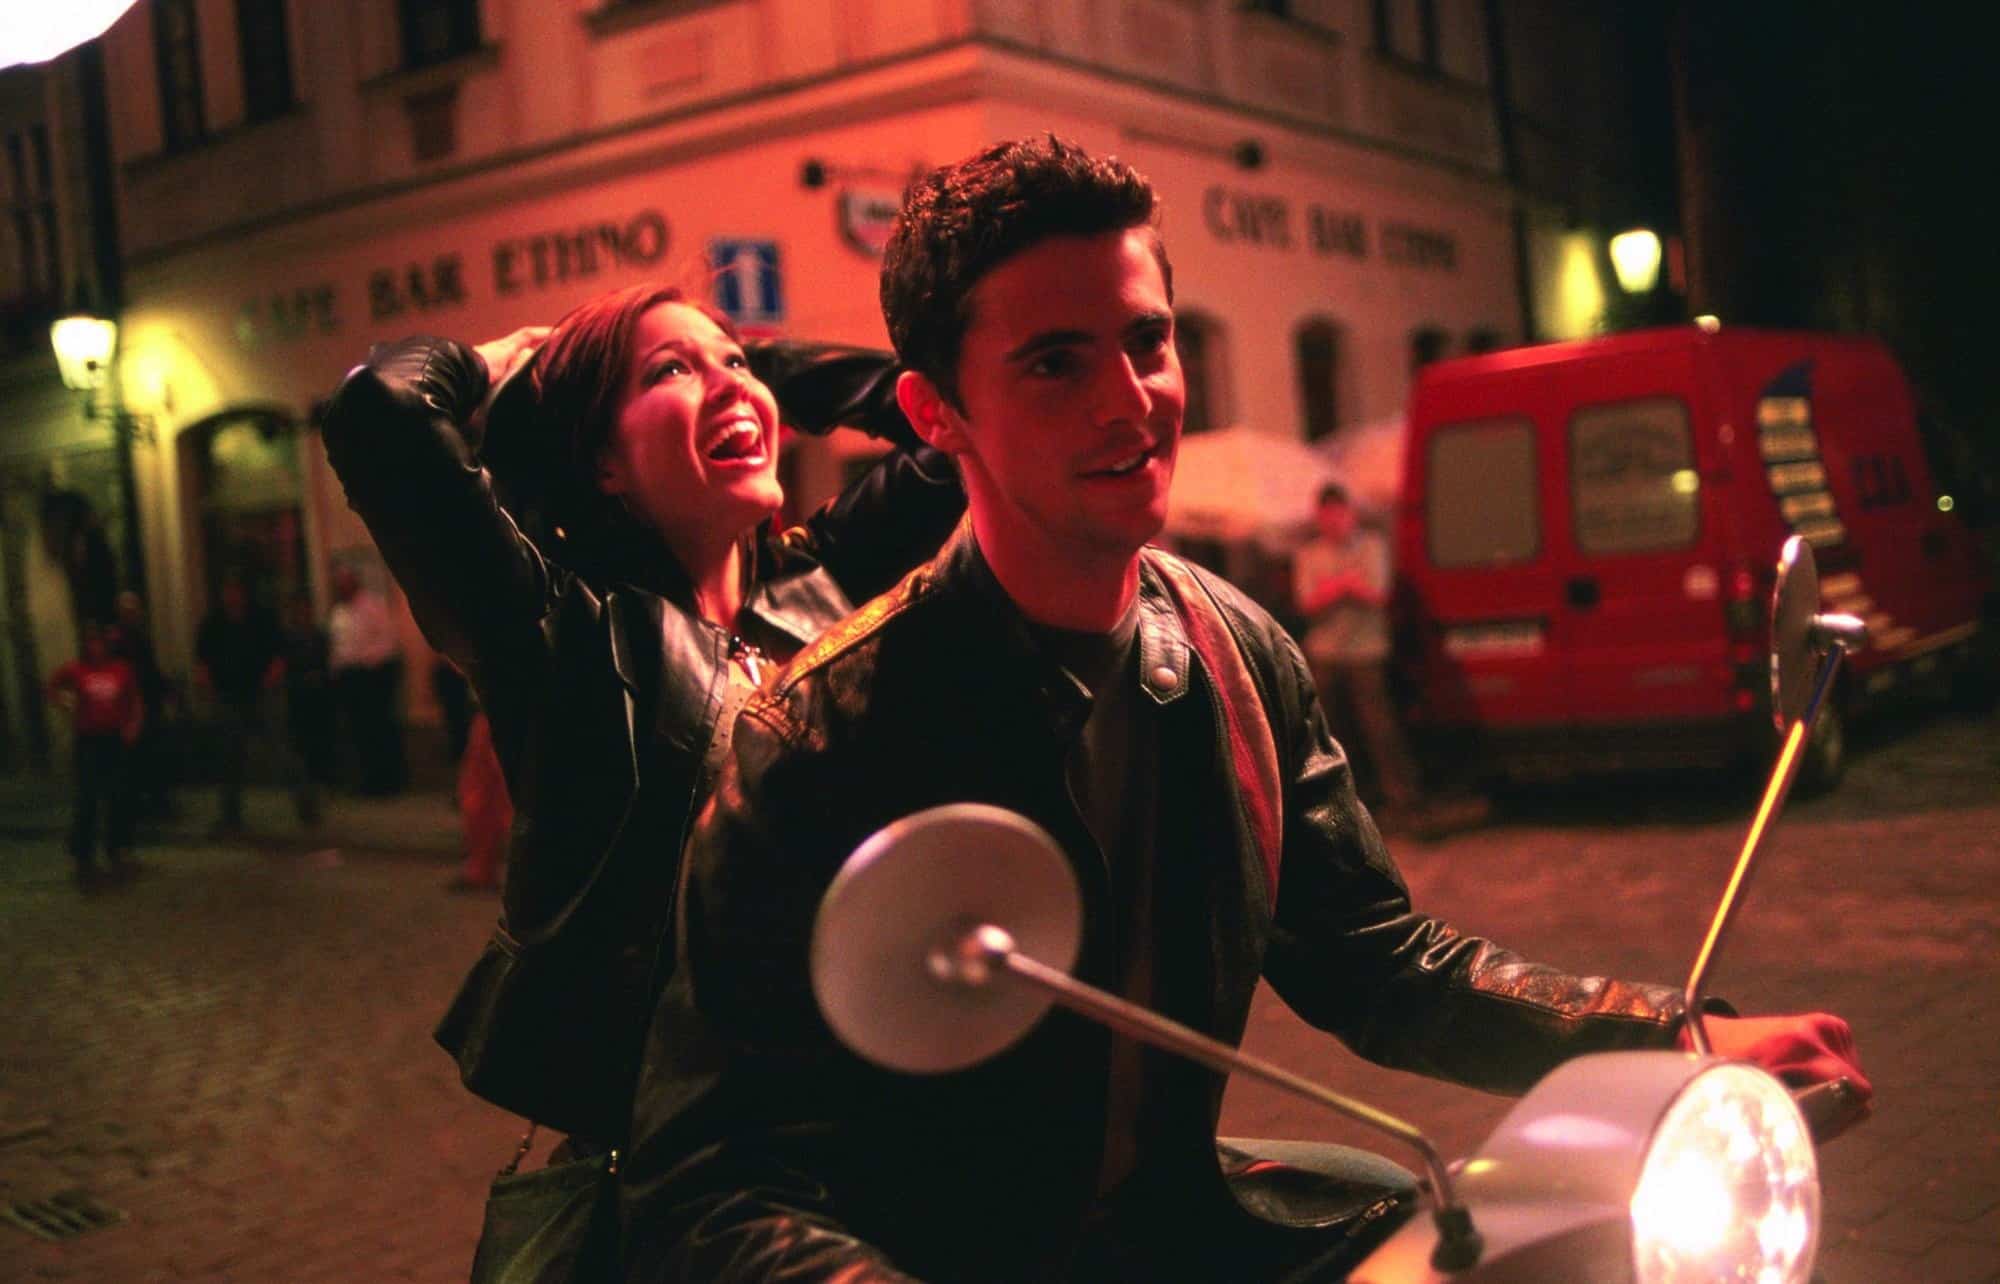 A woman yells out in joy on the back of a man’s motorcycle in this image from Alcon Entertainment.